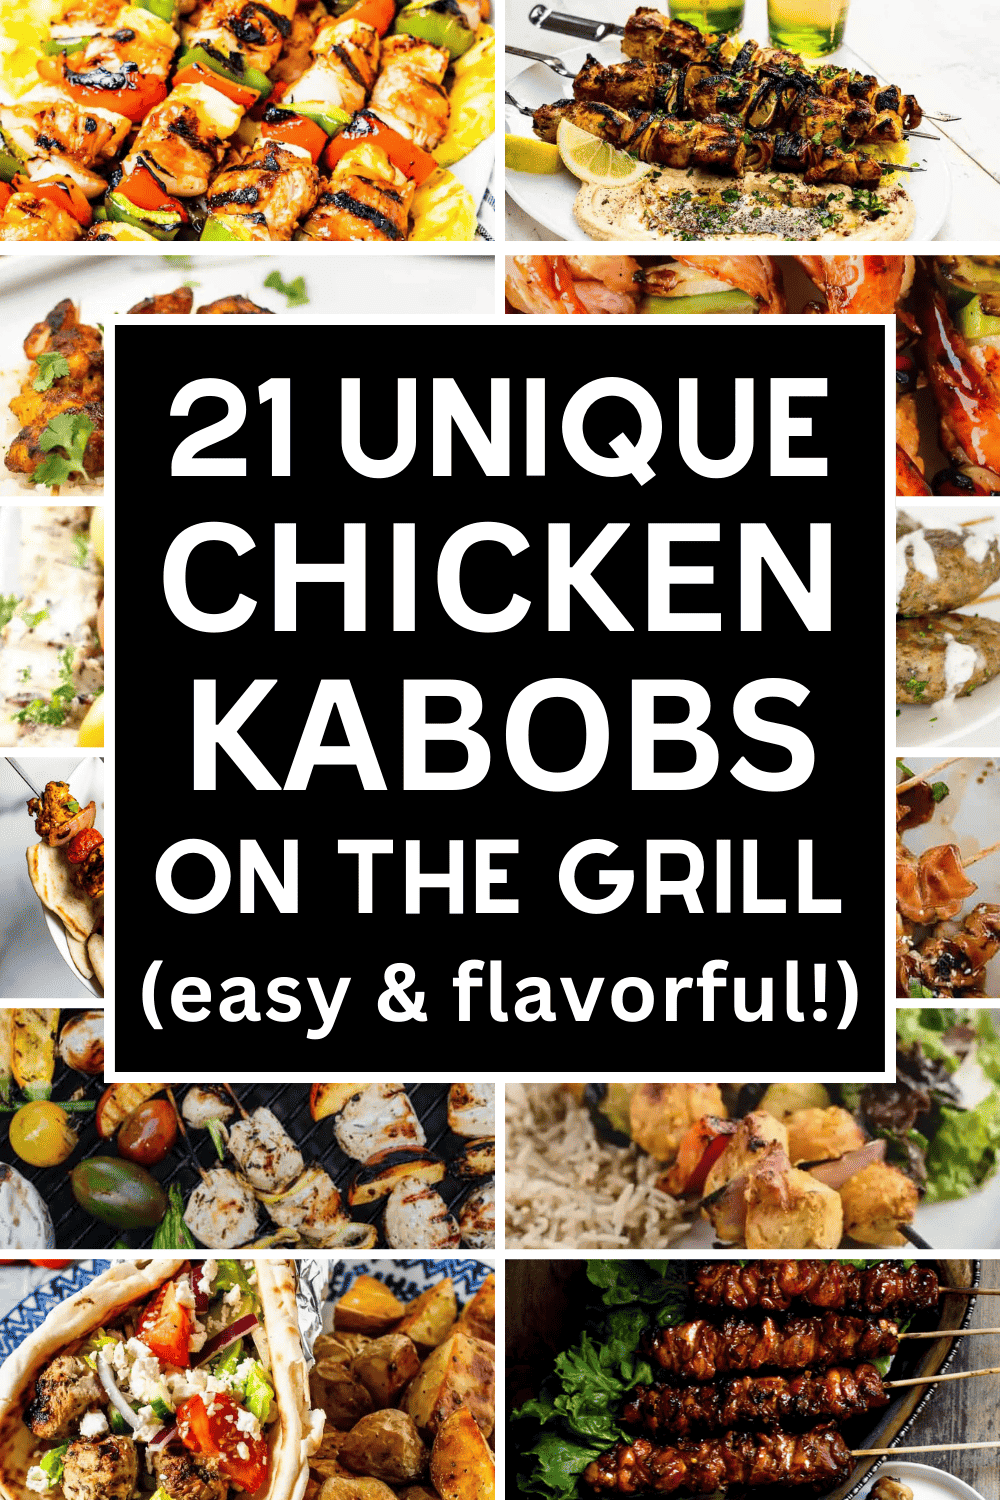 You'll make these easy chicken kabob recipes on the grill on repeat all summer! Chicken kebabs on the grill are a quick and easy summer dinner. Easy chicken kabobs on the grill, bbq chicken kabobs on the grill skewers, grilled chicken kabob recipes, marinade for chicken kabobs on the grill, how to grill shish kabobs, marinated grilled chicken skewers recipes, chicken shish kabobs marinade recipes, teriyaki chicken kabobs on the grill, easy hawaiian chicken kabobs on the grill marinade recipes.